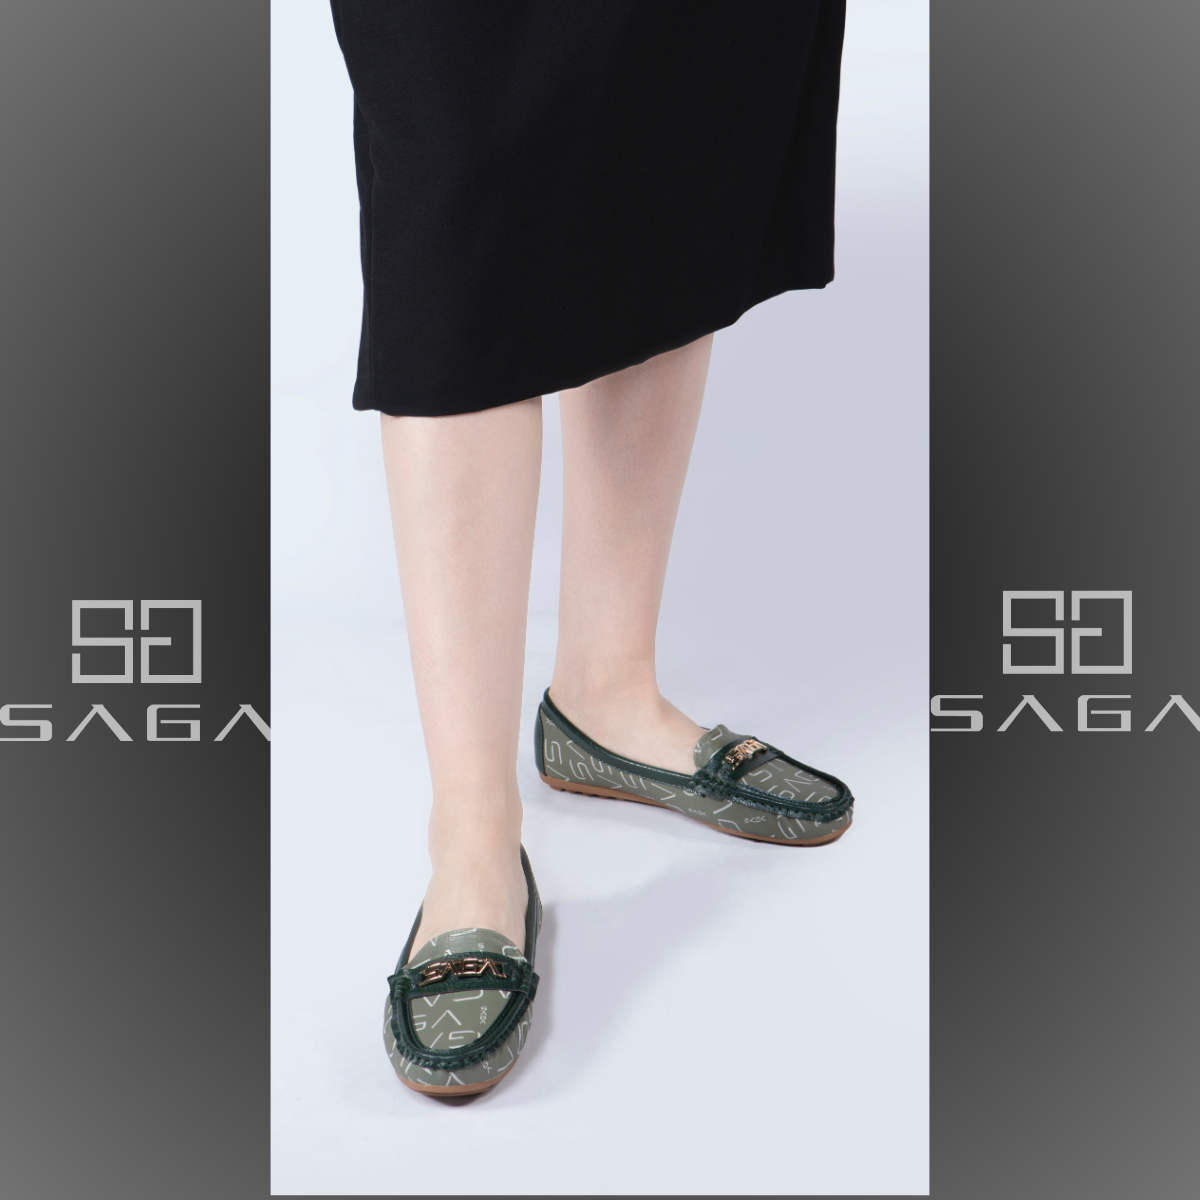 Comfortable, light and elegant shoes from Saga made of microfiber